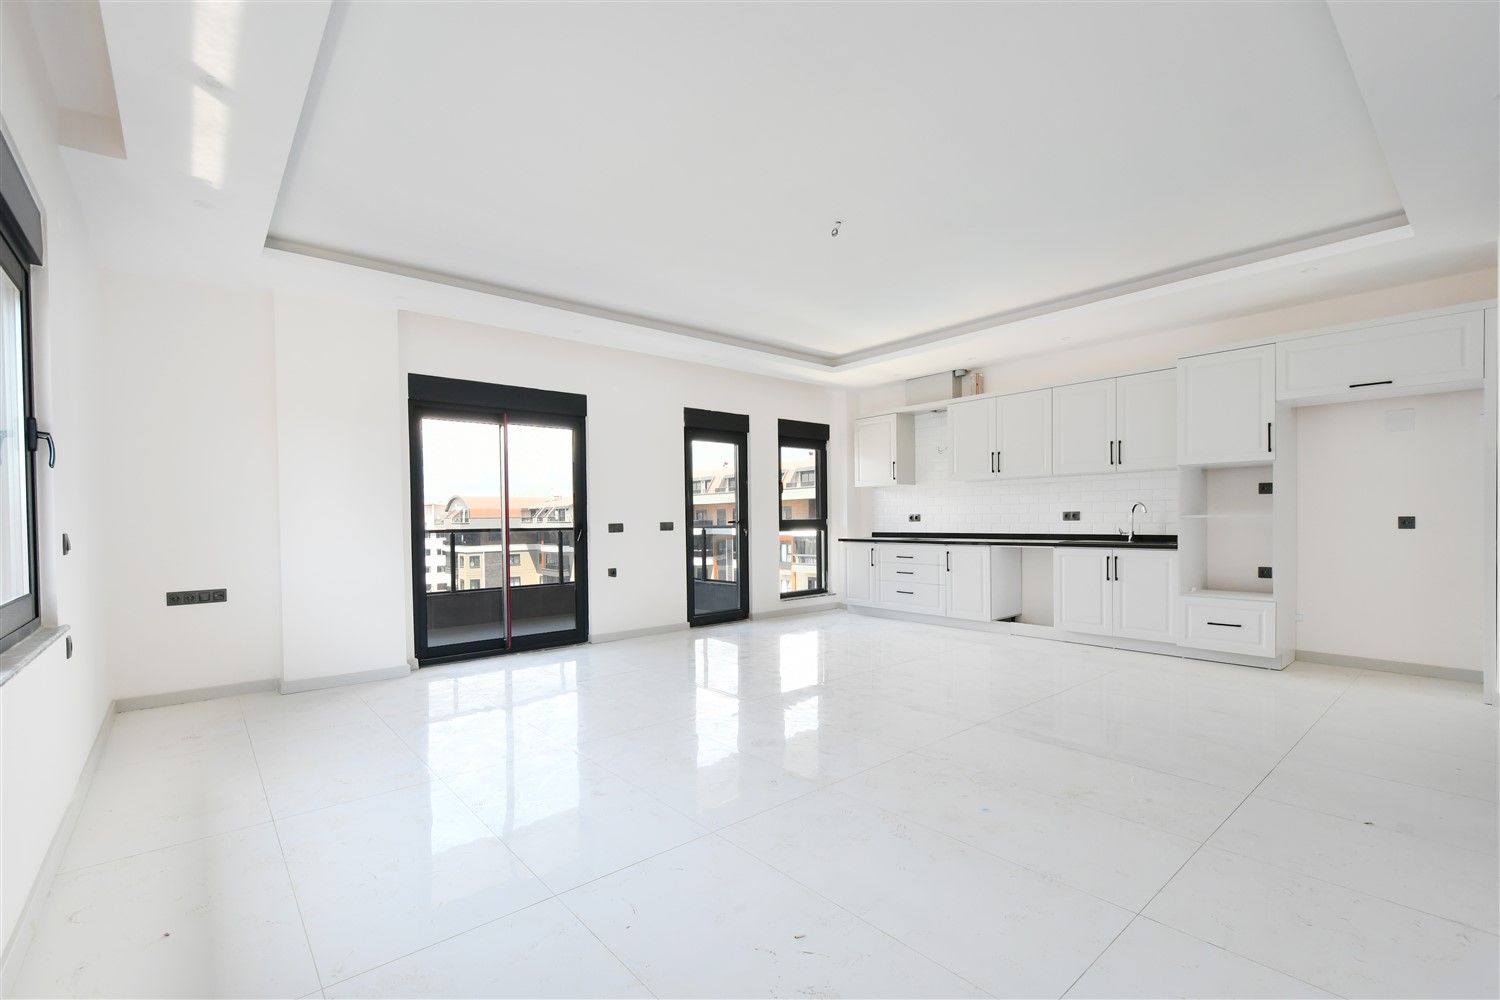 New 3 bedroom penthouse in complex with full activity